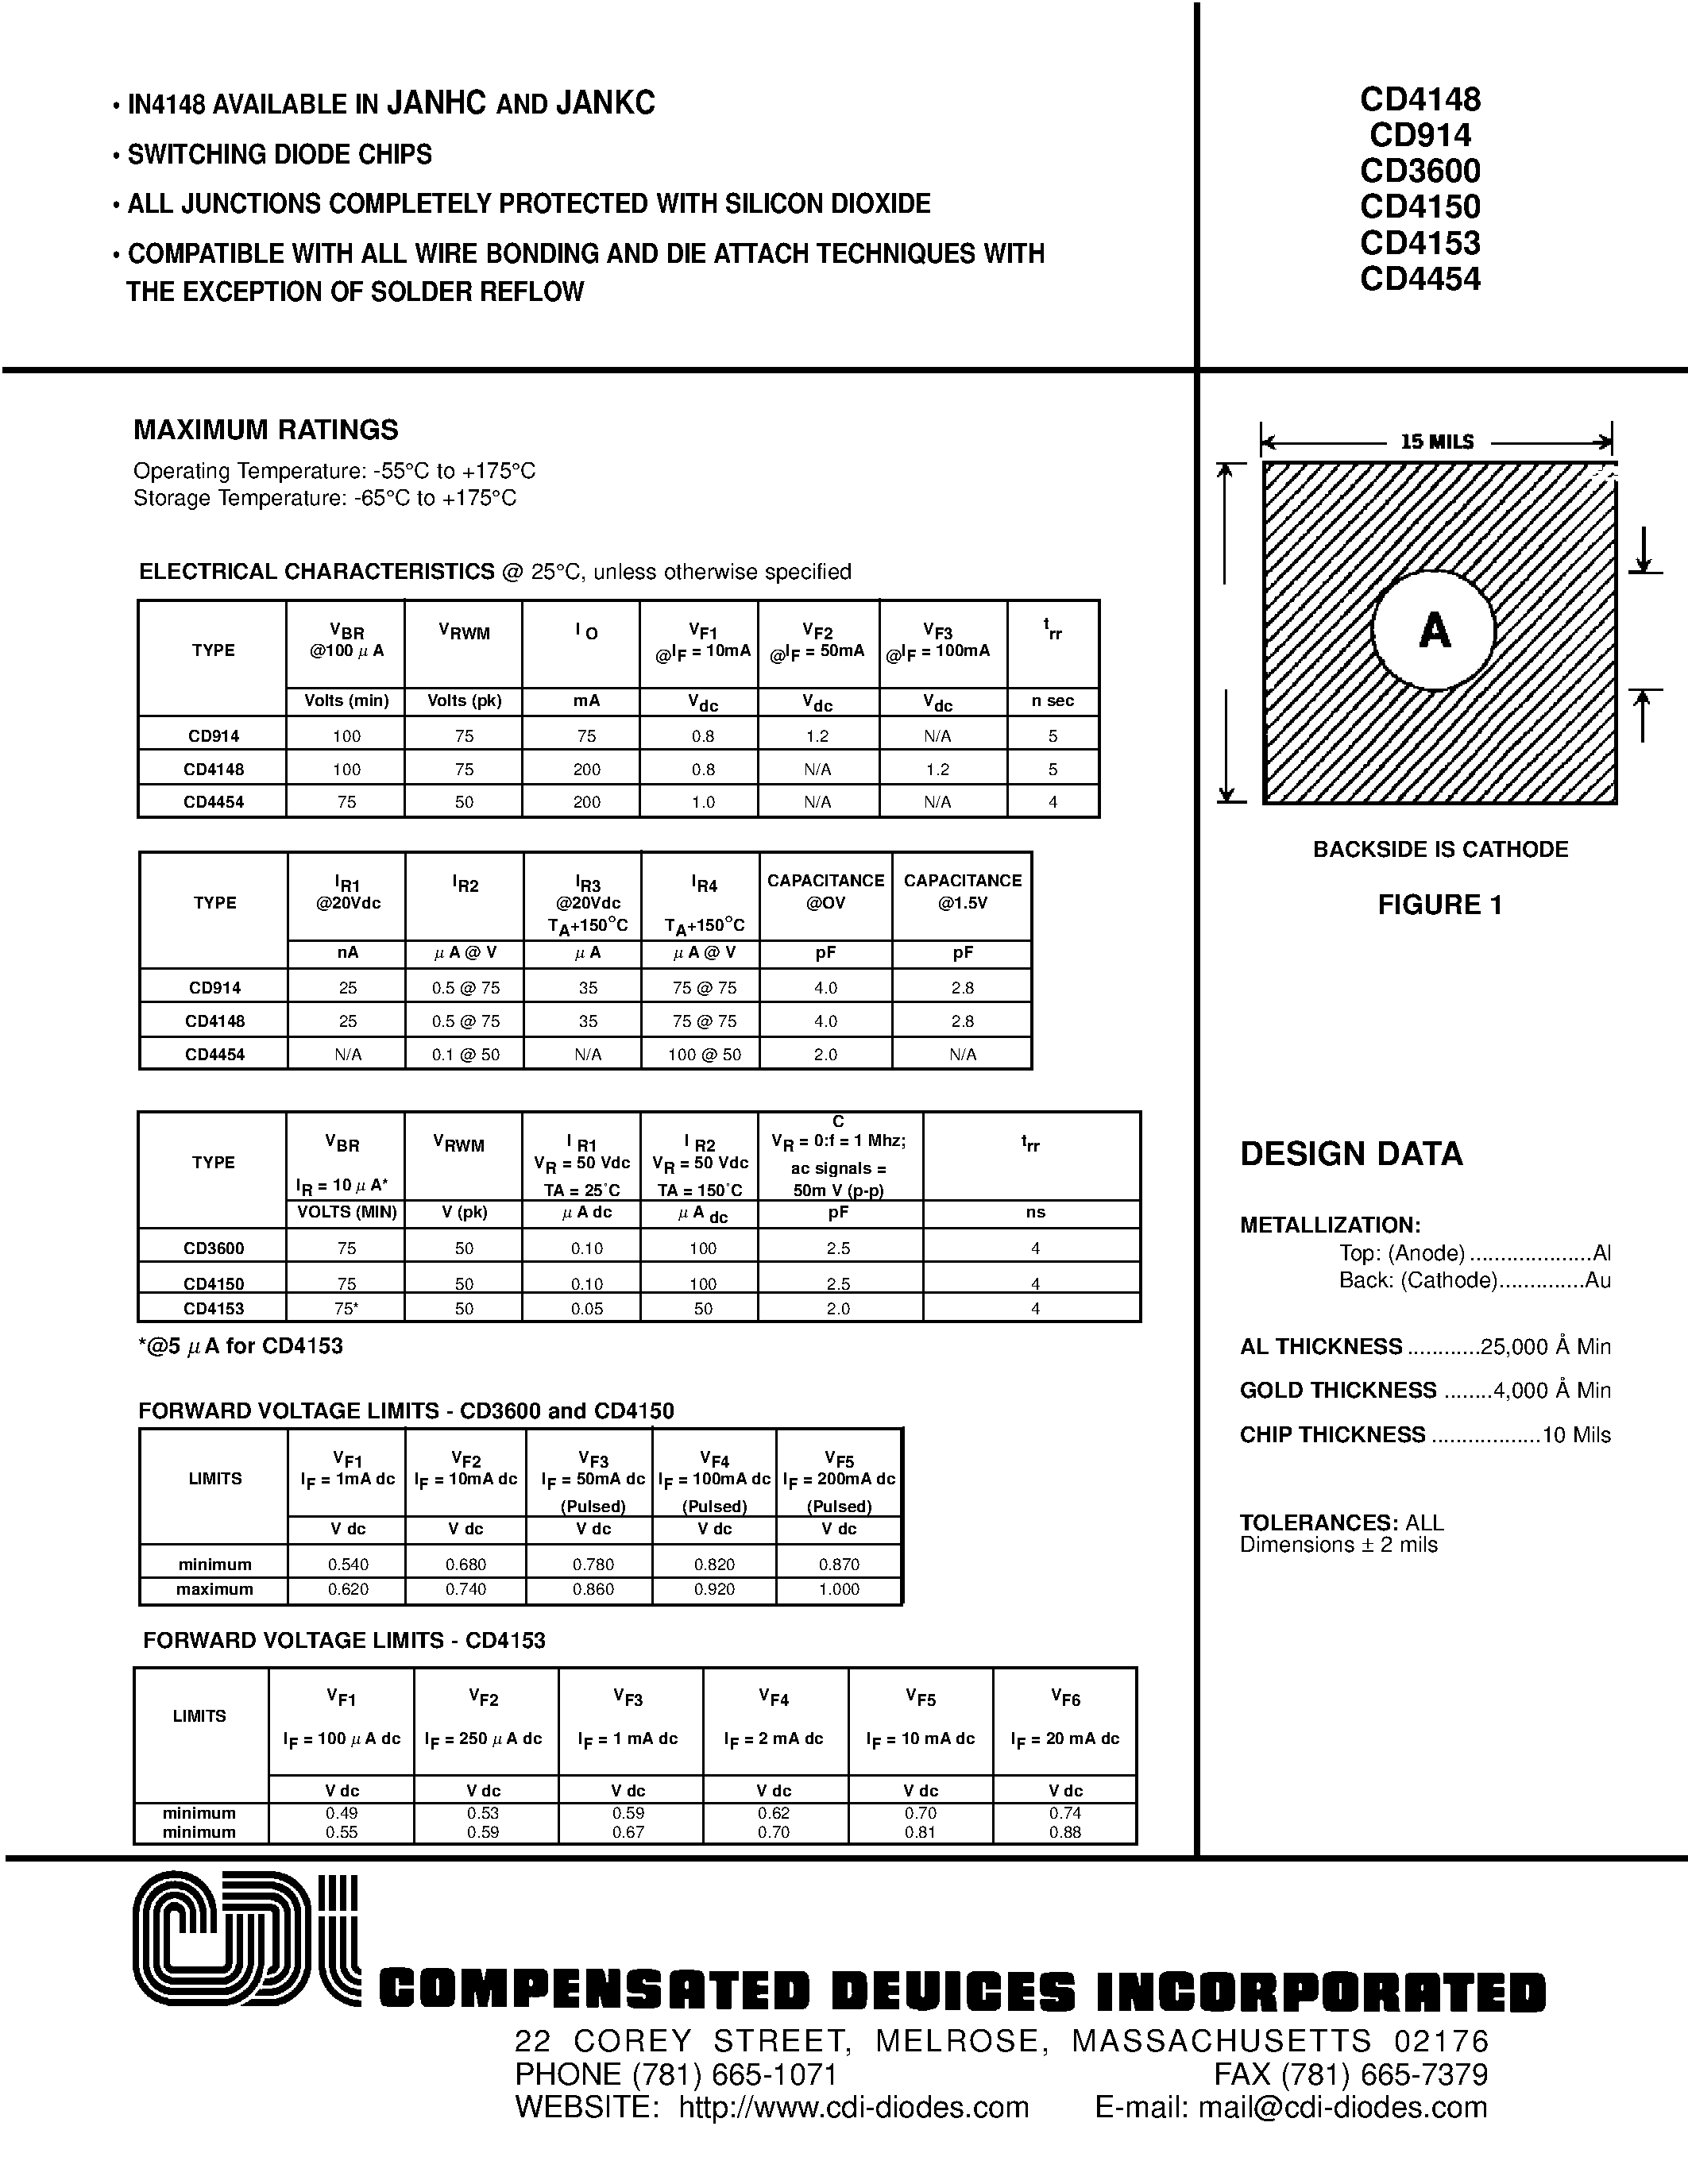 Datasheet CD3600 - SWITCHING DIODE CHIPS page 1